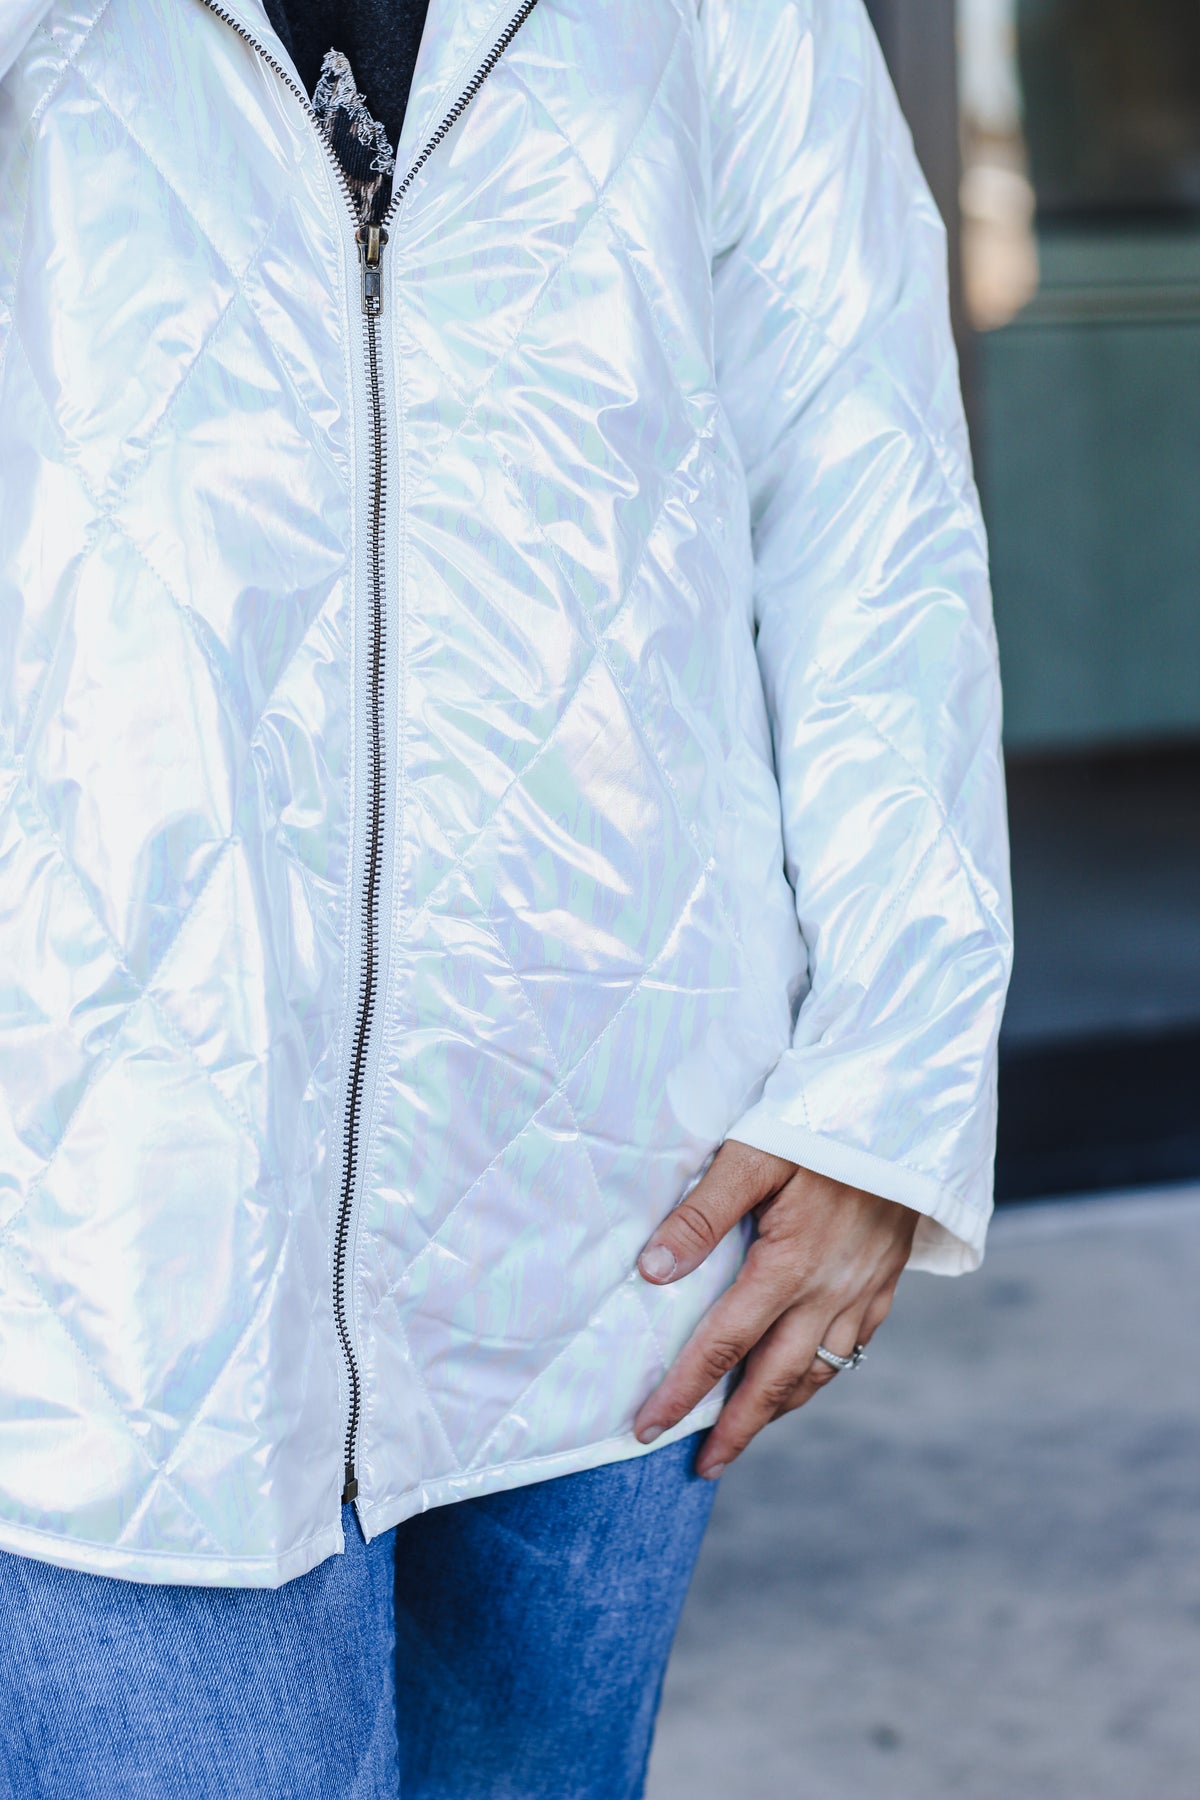 The Silver Lining Jacket